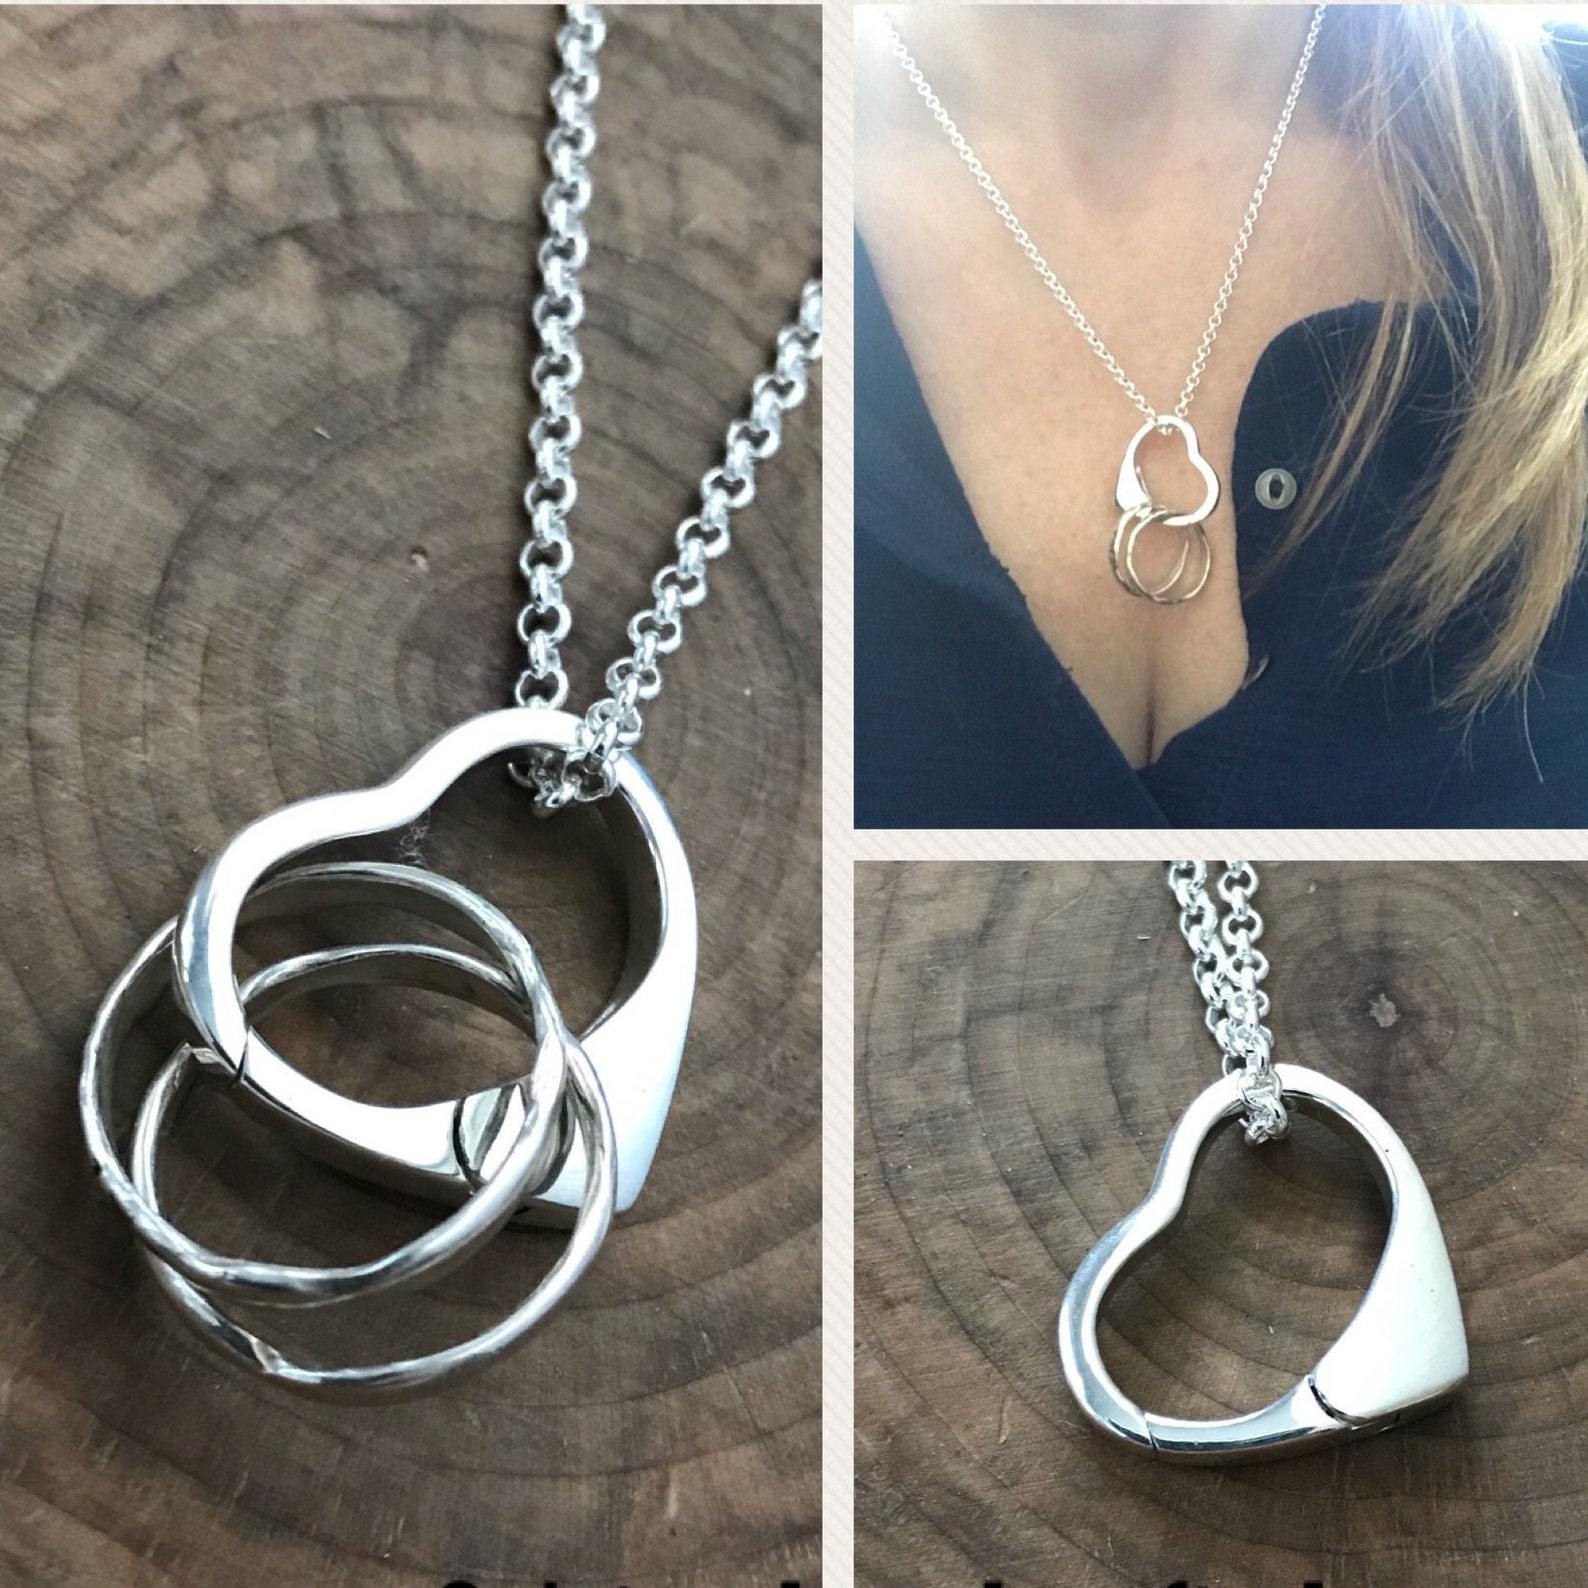 Buy Horseshoe Ring Holder Necklace, Wedding Ring Keeper Pendant, Oval  Dainty Jewelry, Gift for Her Doctor Online in India - Etsy